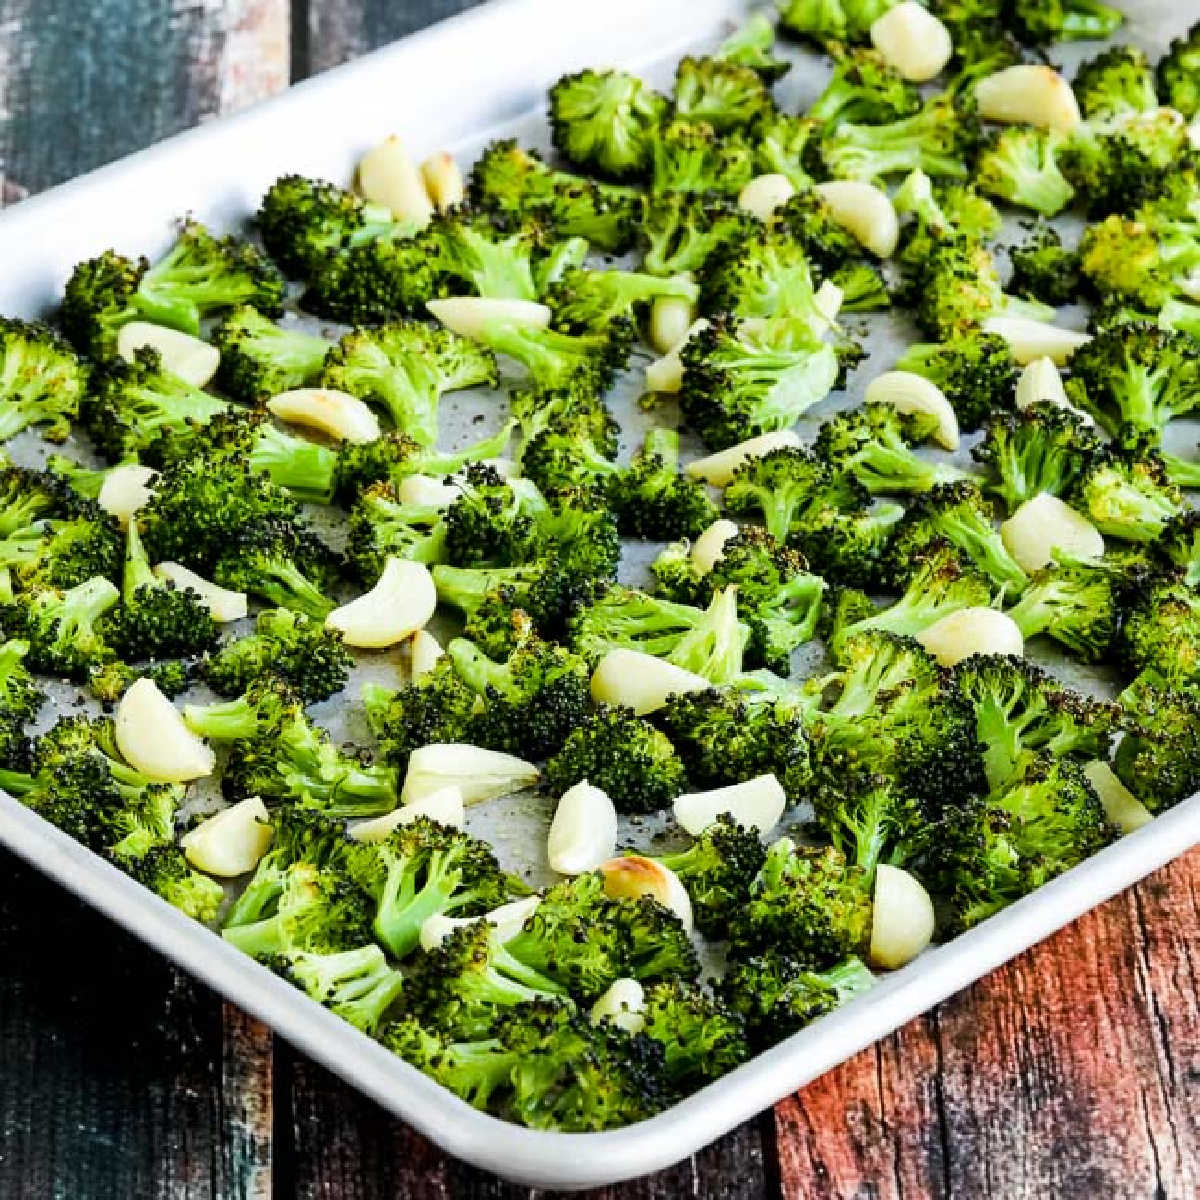 Roasted Broccoli with Garlic shown on sheet pan